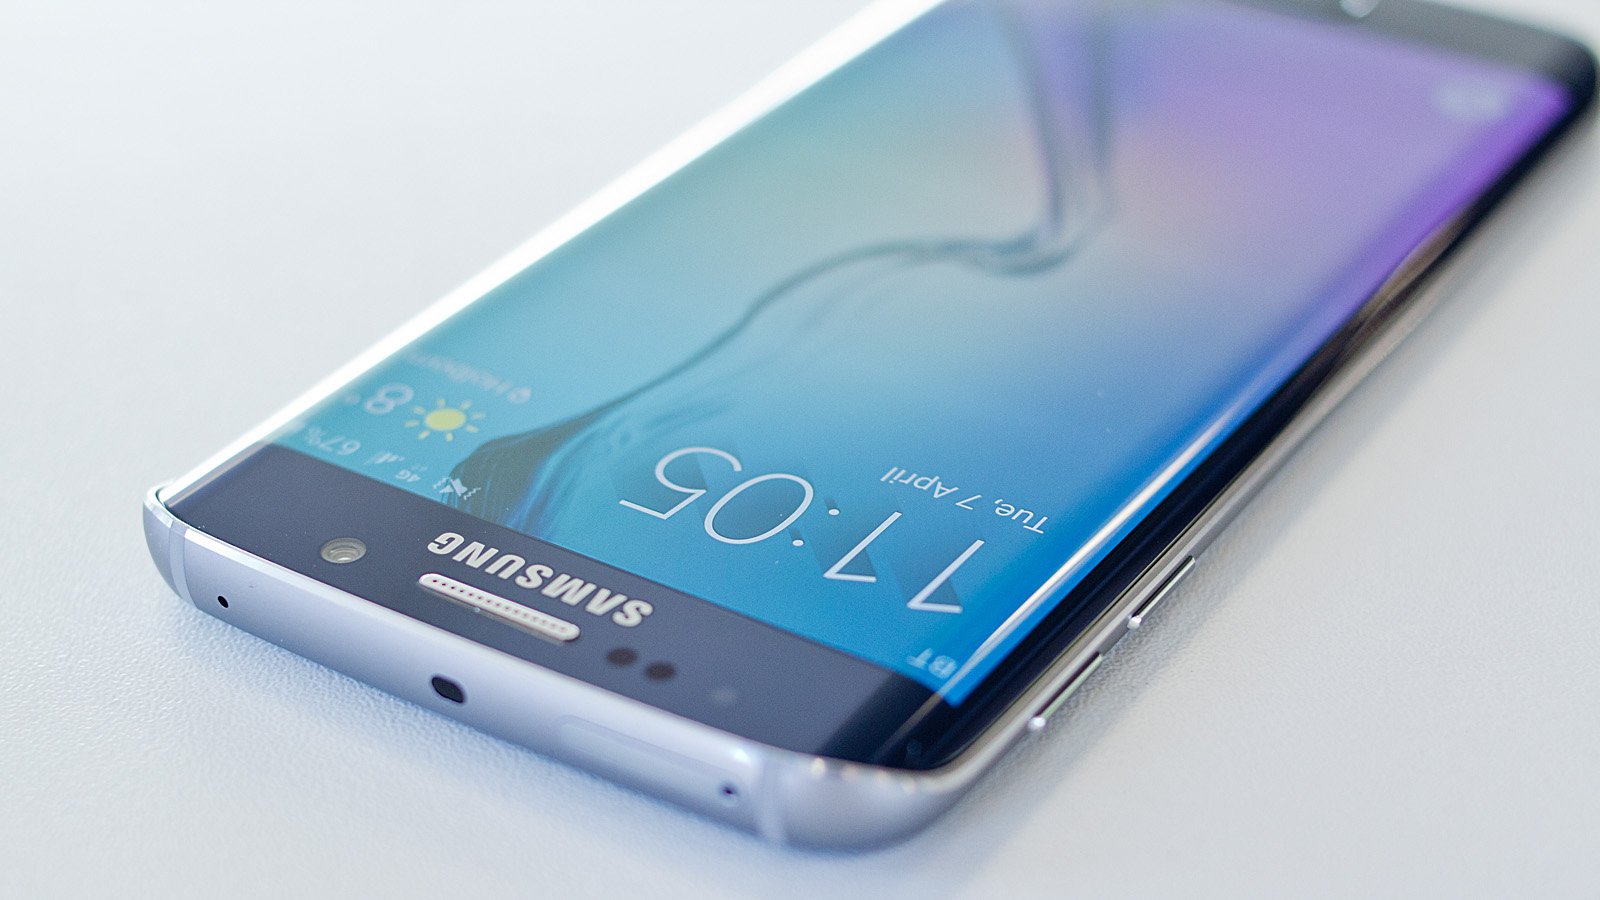 Samsung Galaxy S7 to be Launched